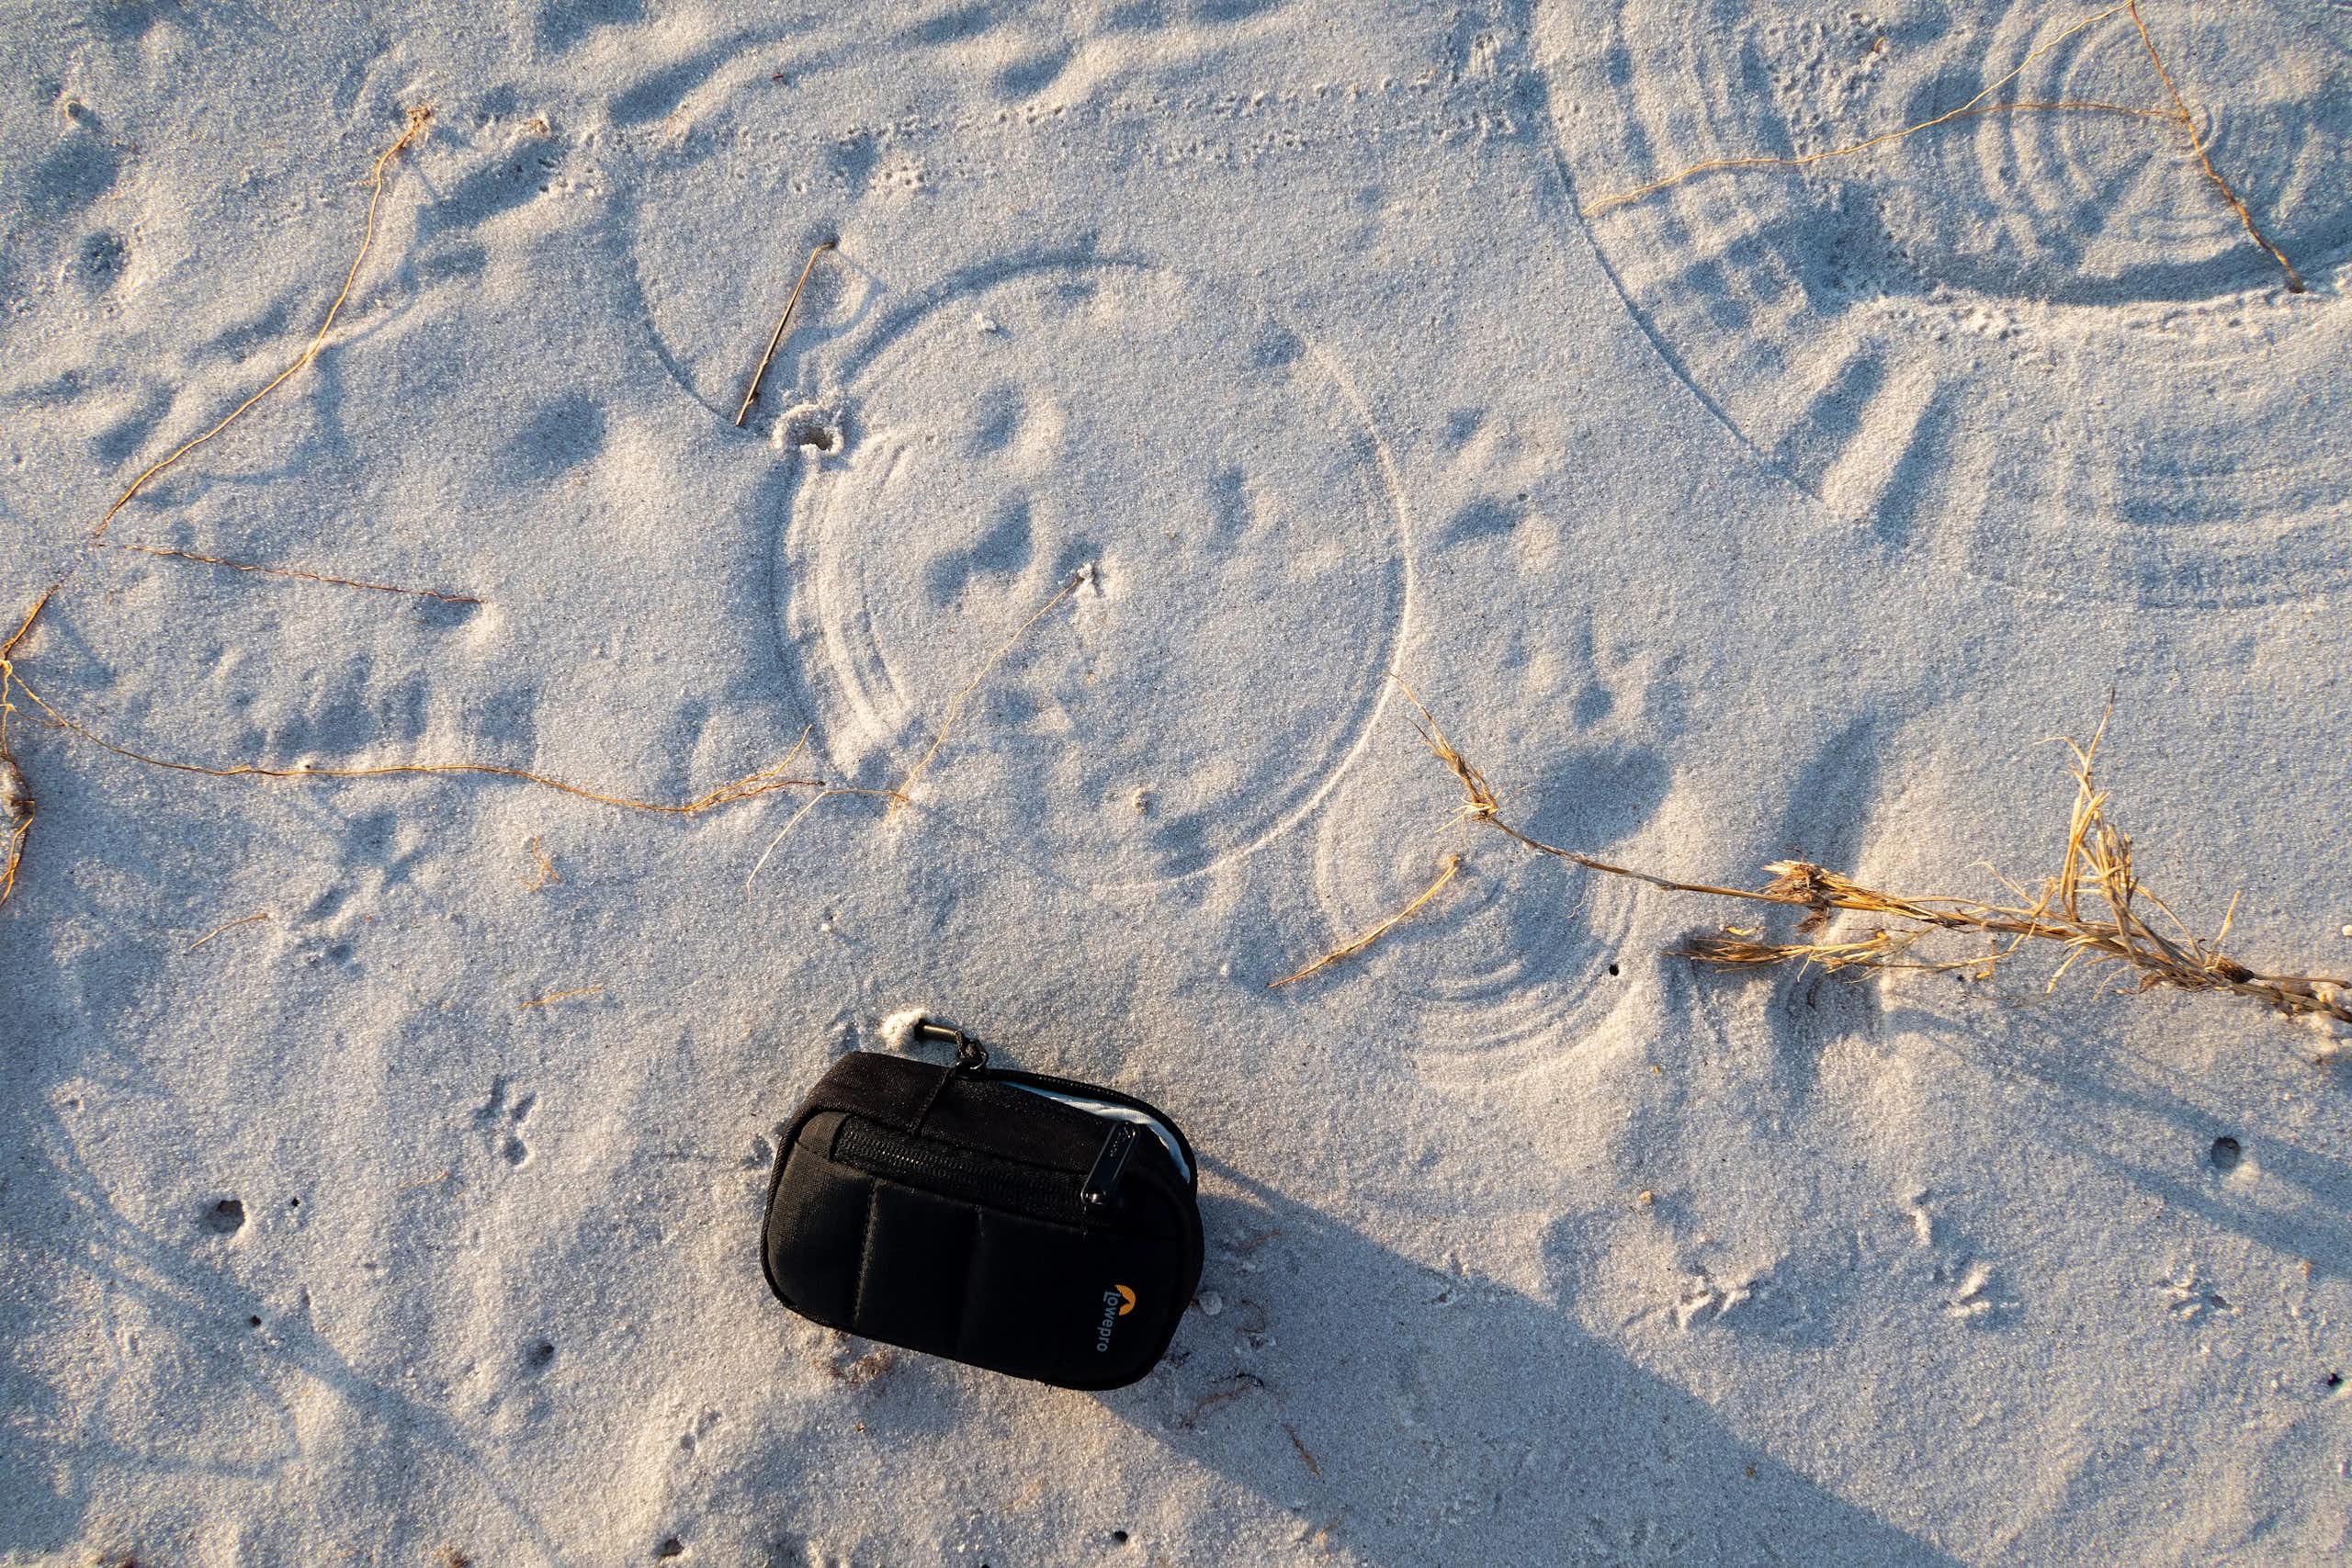 A camera bag lies on beach sand alongside several circles created by plant fronds, which are also pictured